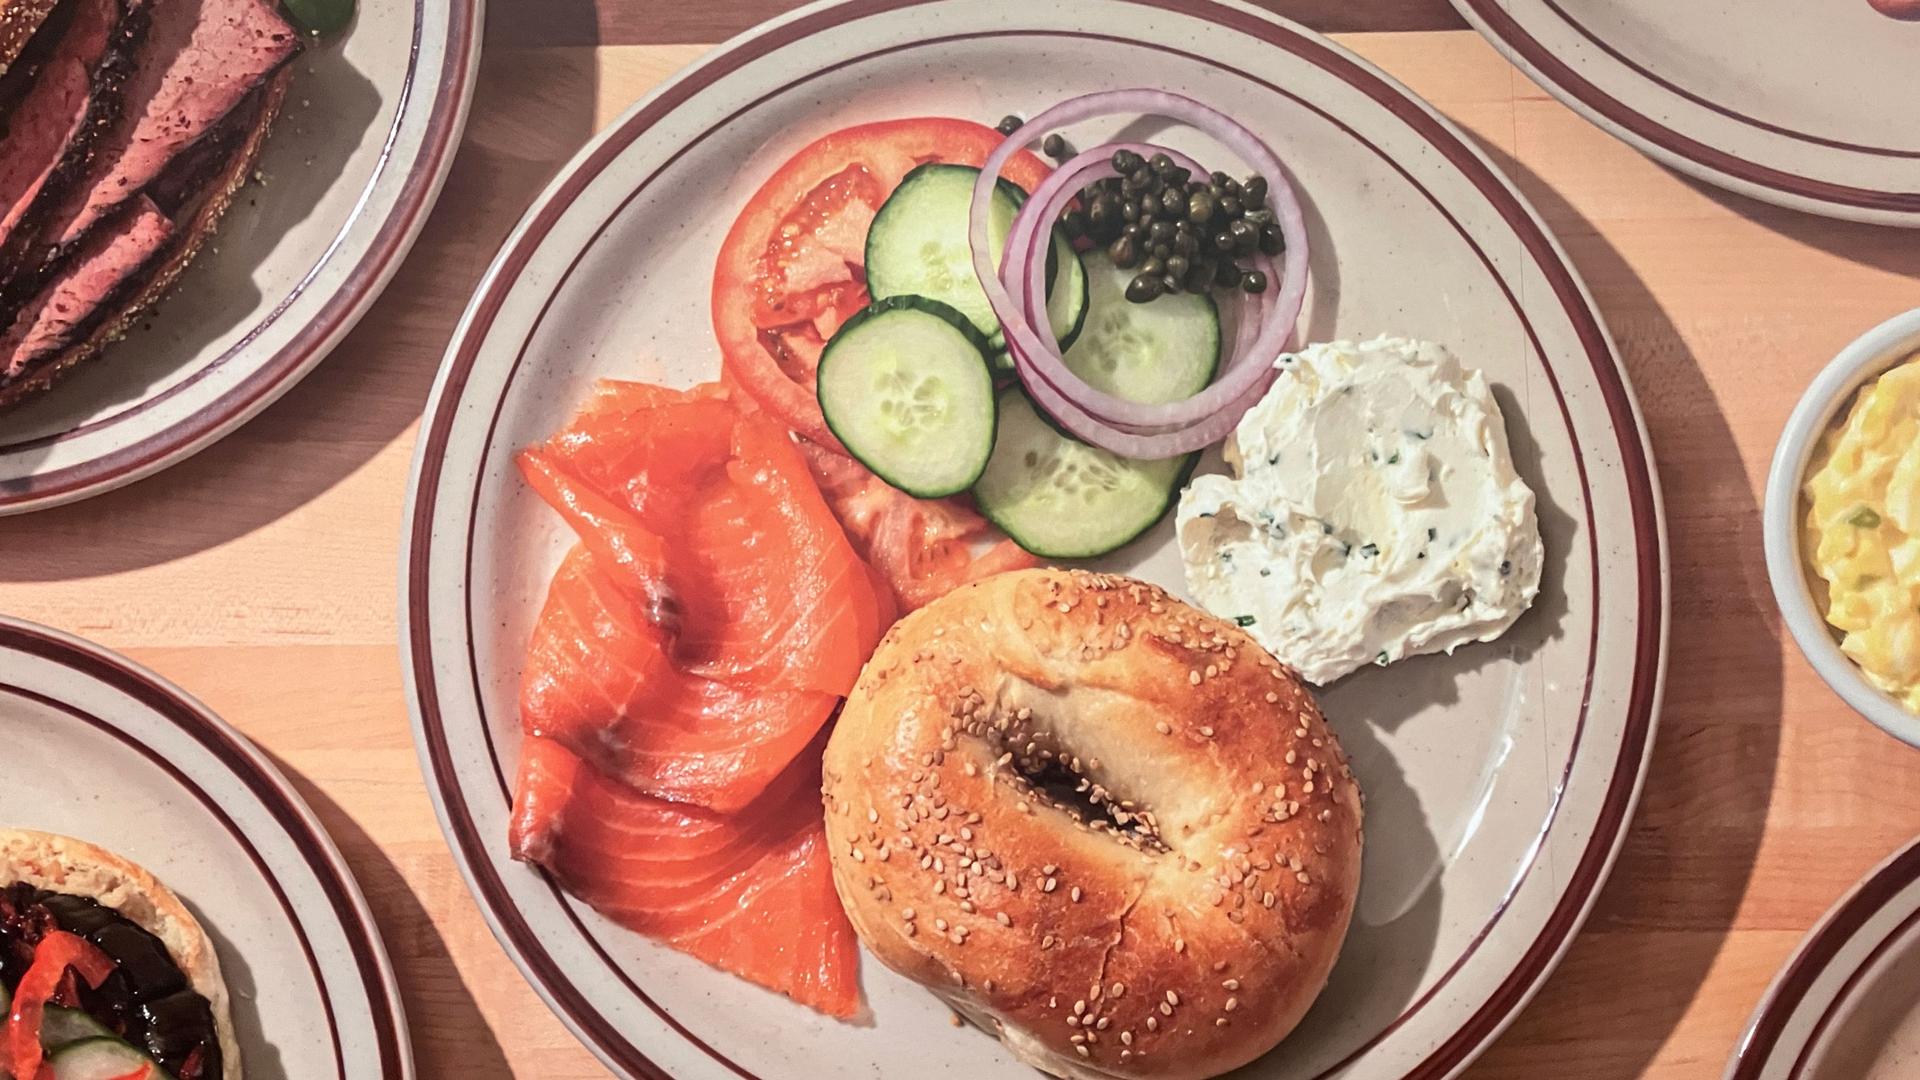 "I'll Have What She's Having" is an exhibit that explores the history of Jewish delis in America.